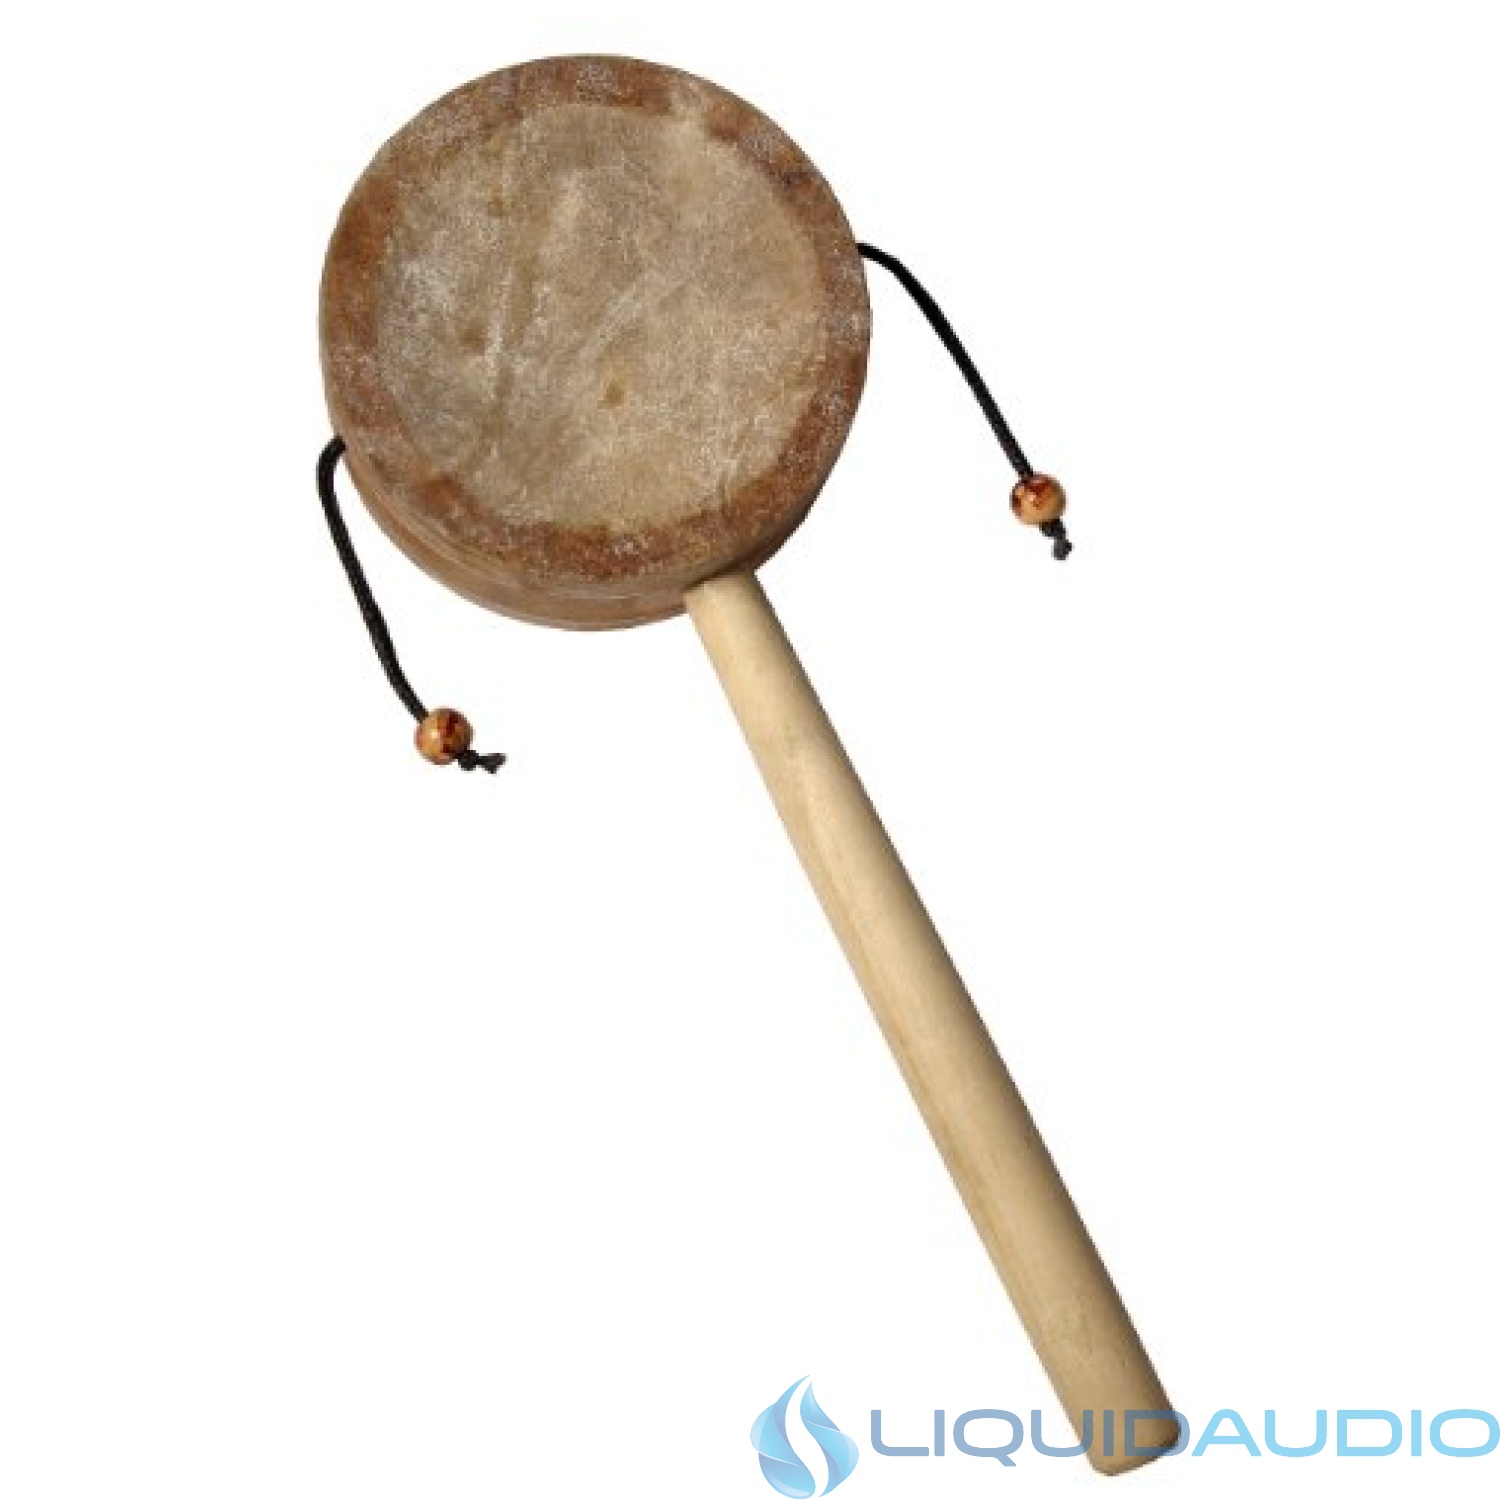 Monkey Drum on a Handle, 3.25"